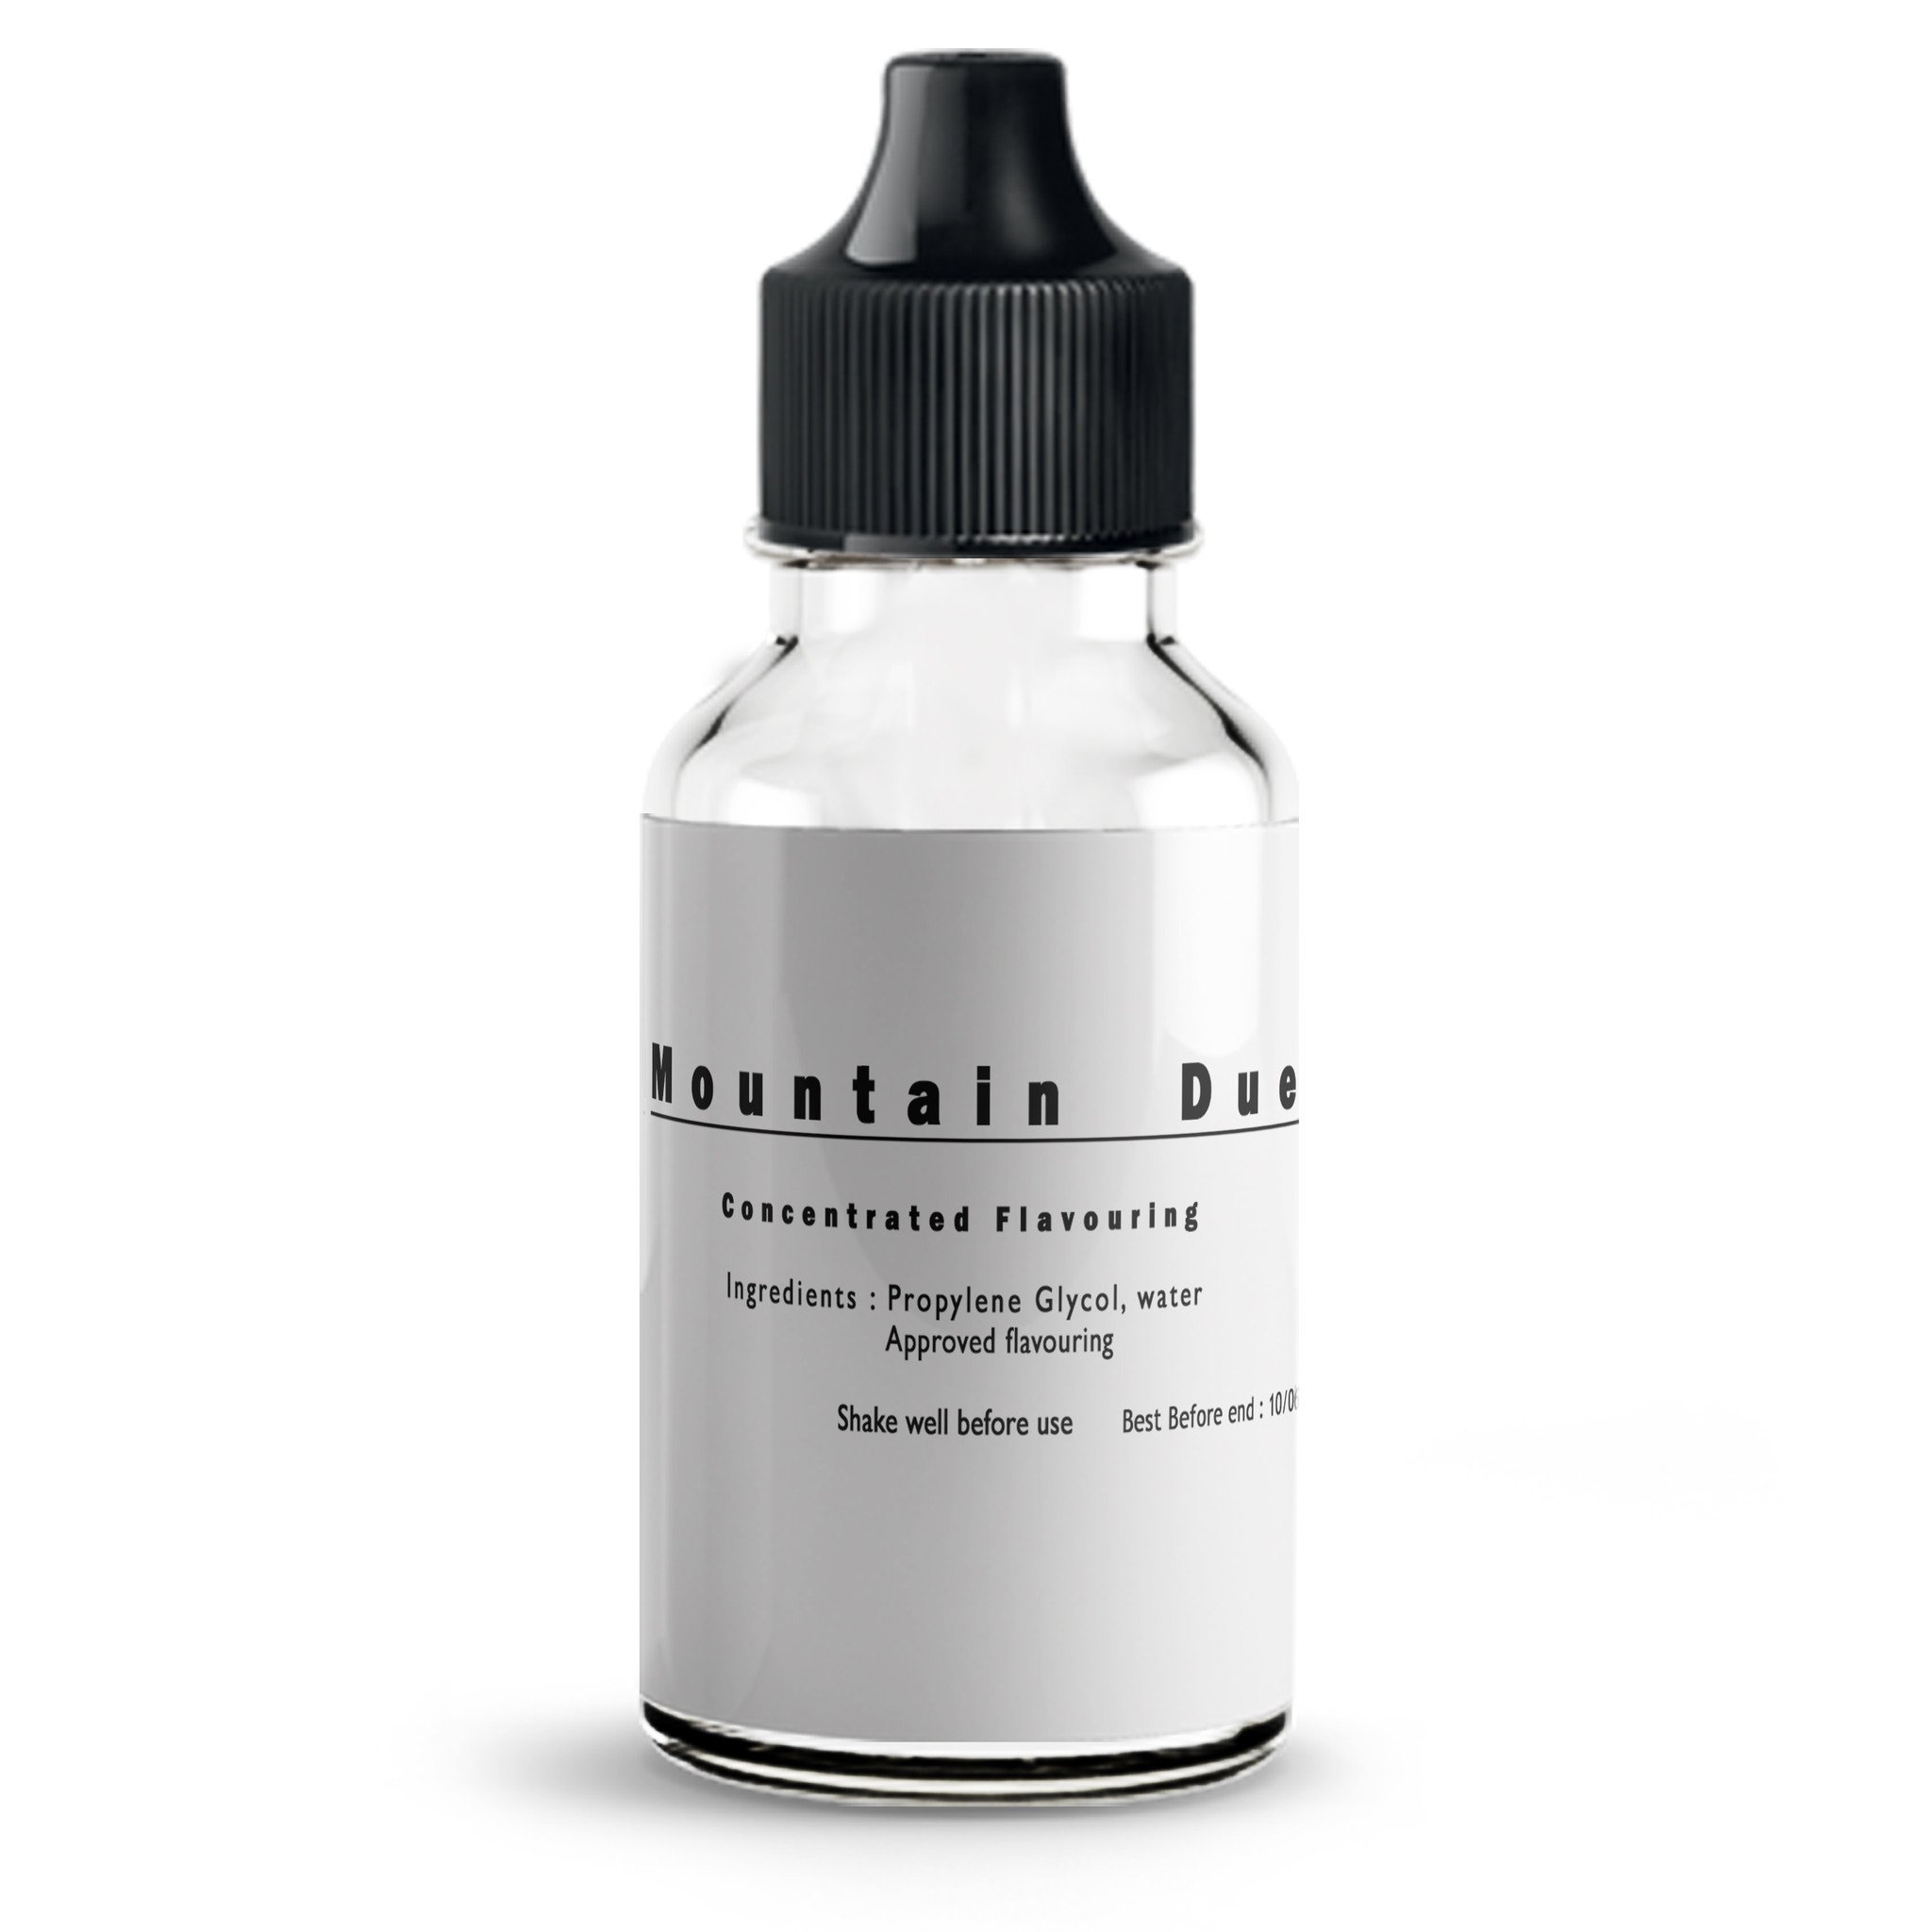 Mountain dew type Flavour Concentrate for E liquids